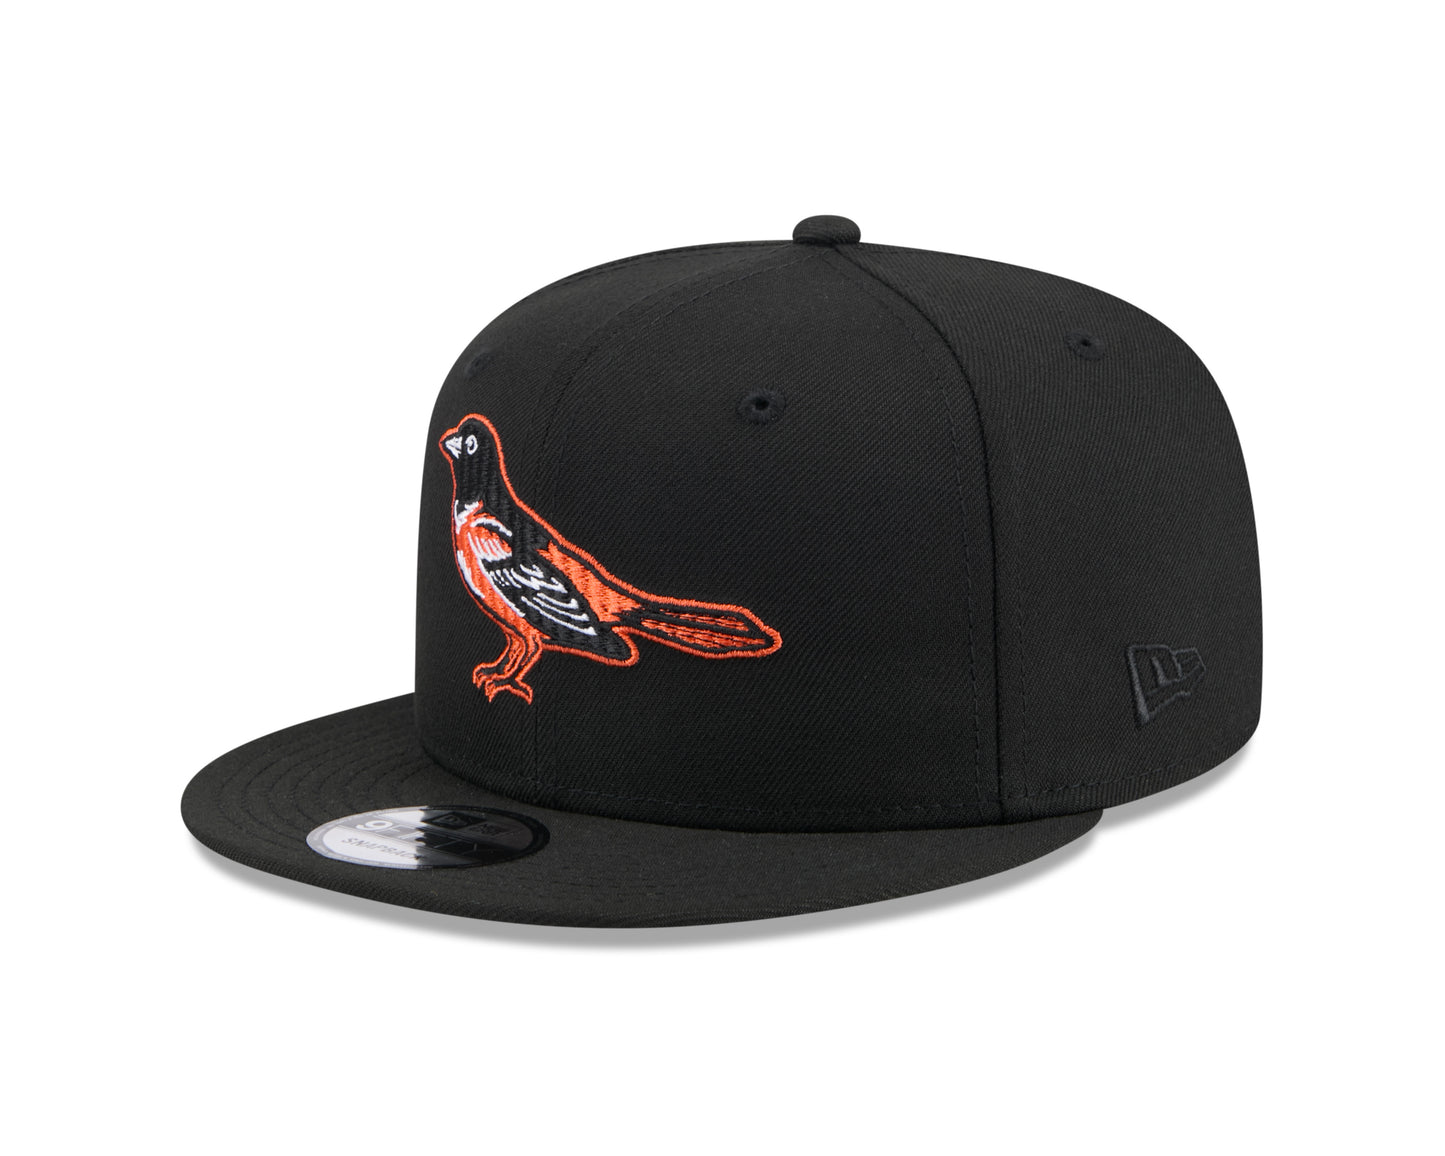 New Era  - 9Fifty Snapback - Animal Fill - Baltimore Orioles Cooperstown - Black - Headz Up 